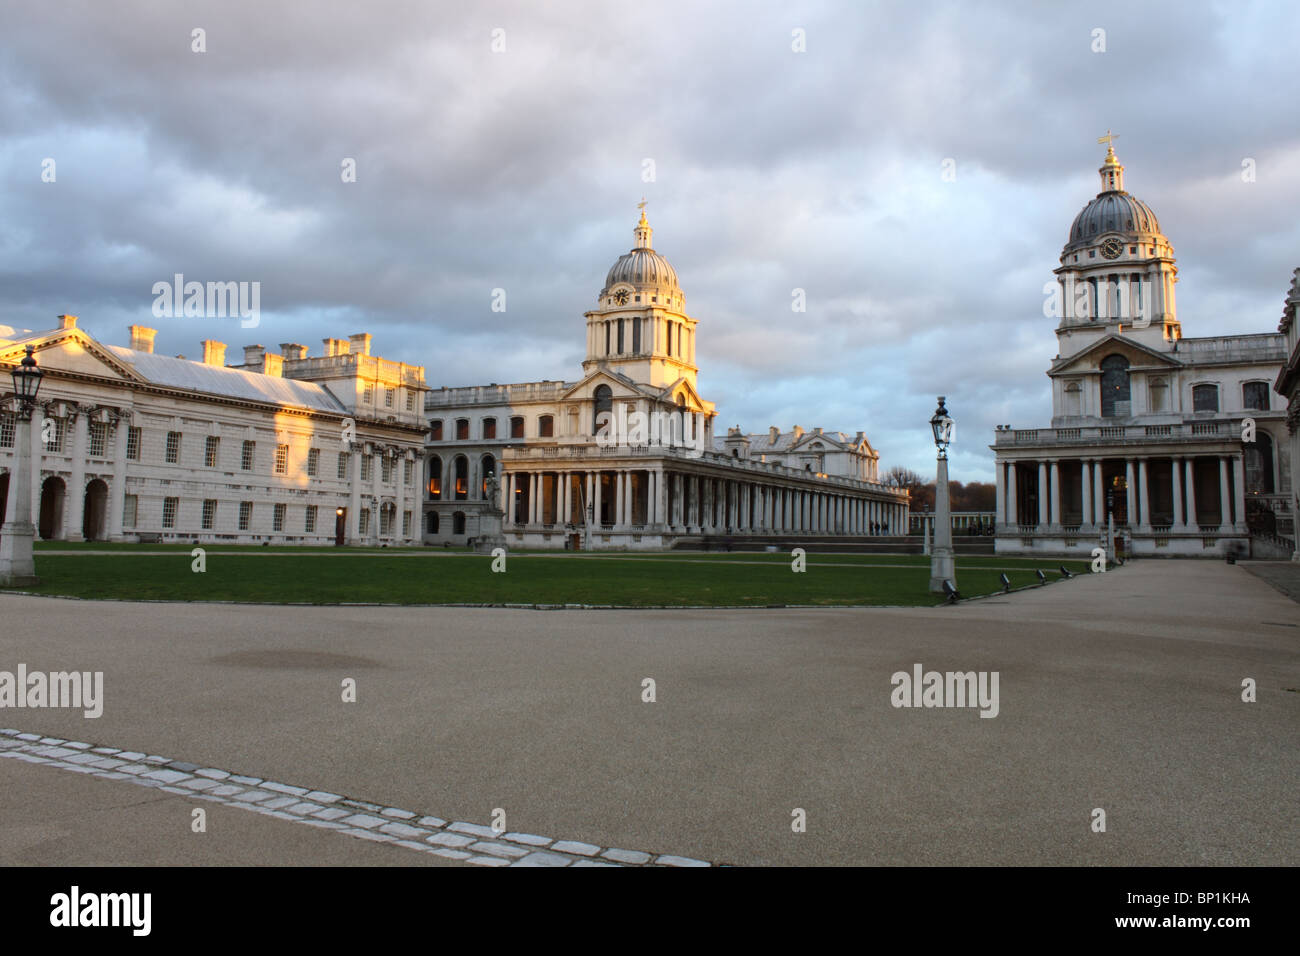 Courtyard of the Royal Naval College, Greenwich, London, England, UK with evening light on the towers and grey dappled sky Stock Photo